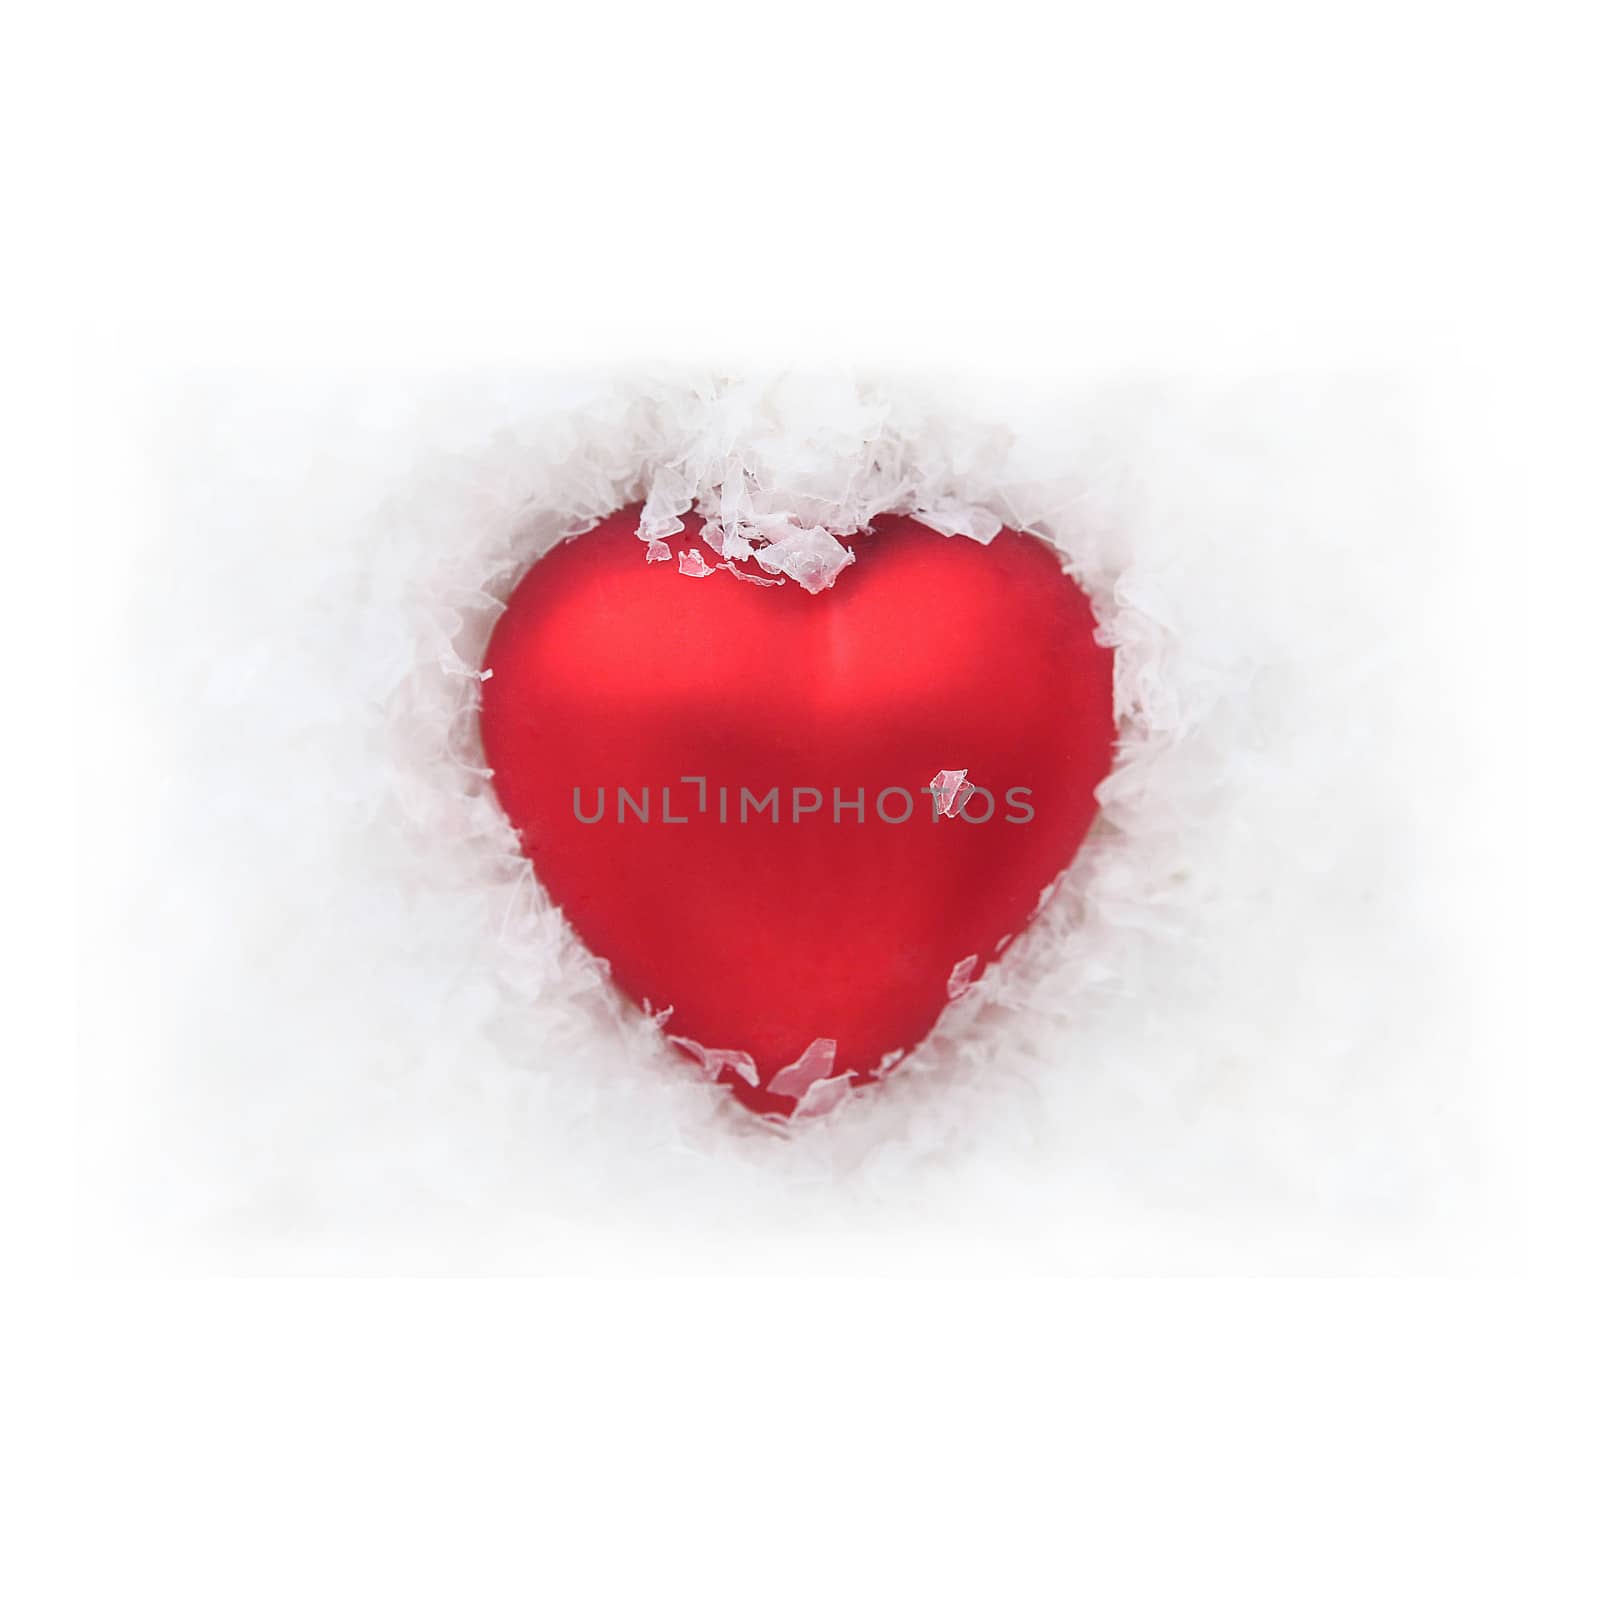  Red heart in the snow - white background  by cococinema